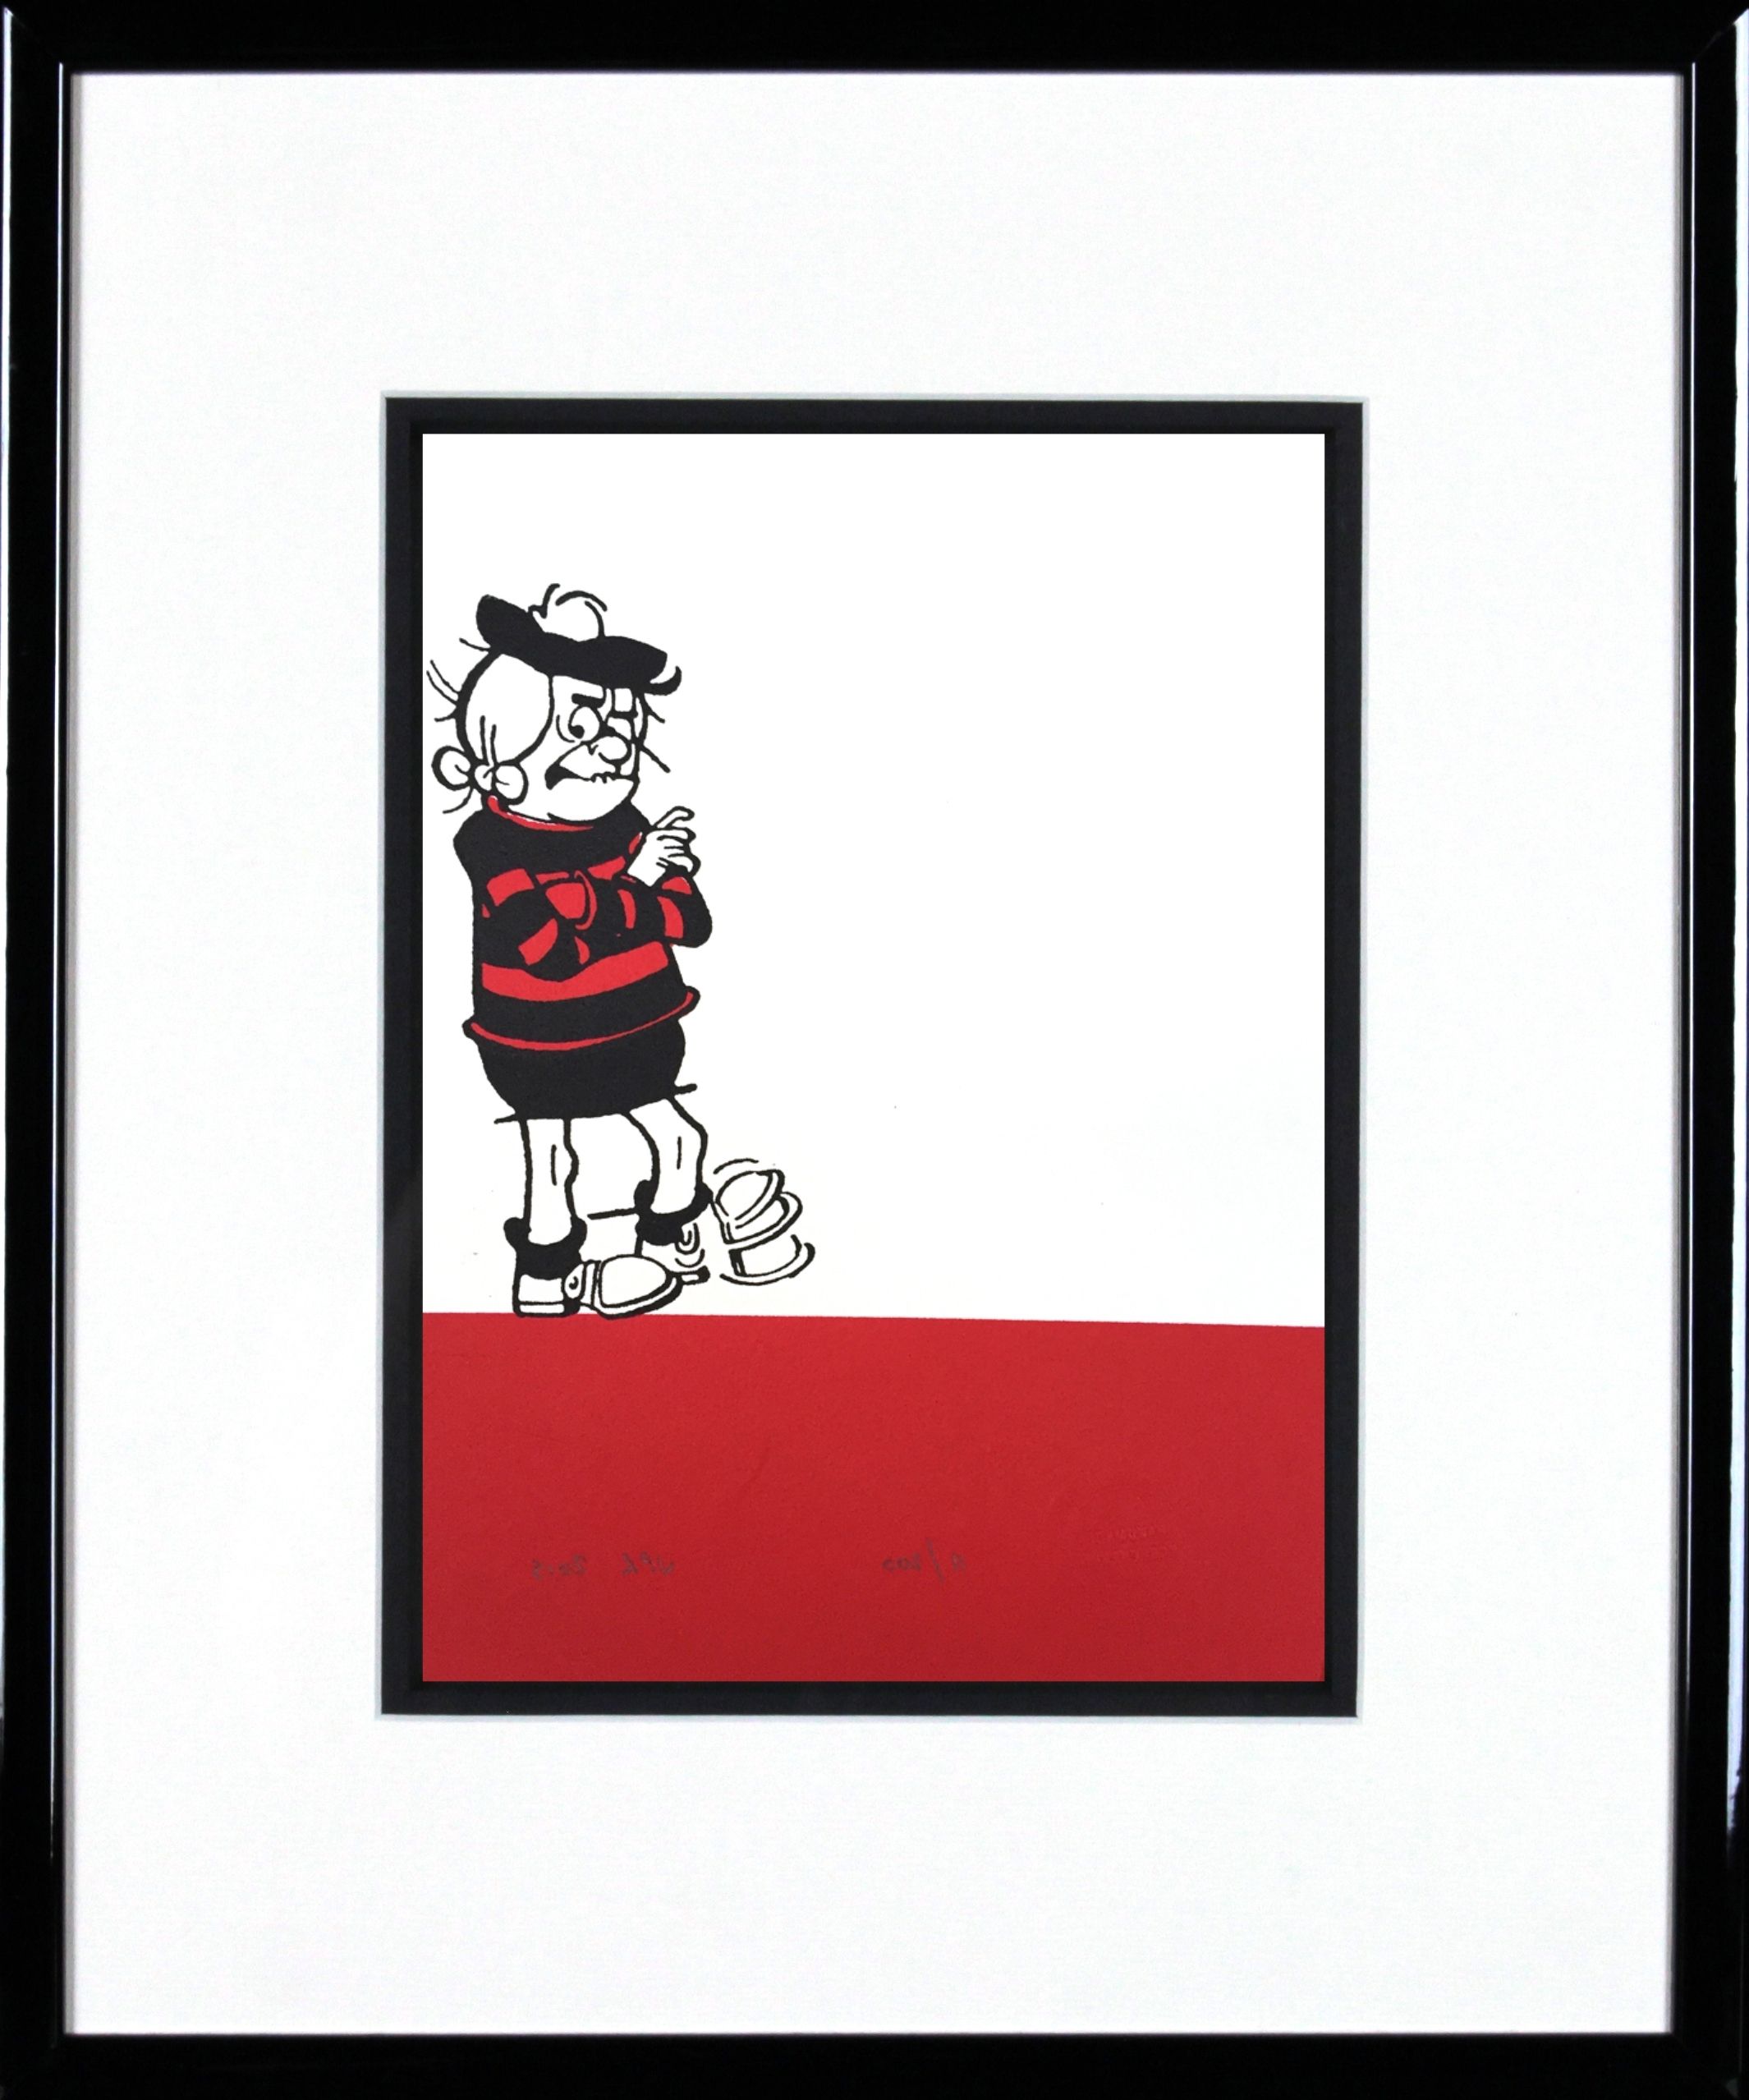 Framed Comic Art Prints Intended For Most Current Minnie The Minx Taps Her Foot (framed) – Eduardo Alessandro Studios (View 8 of 15)